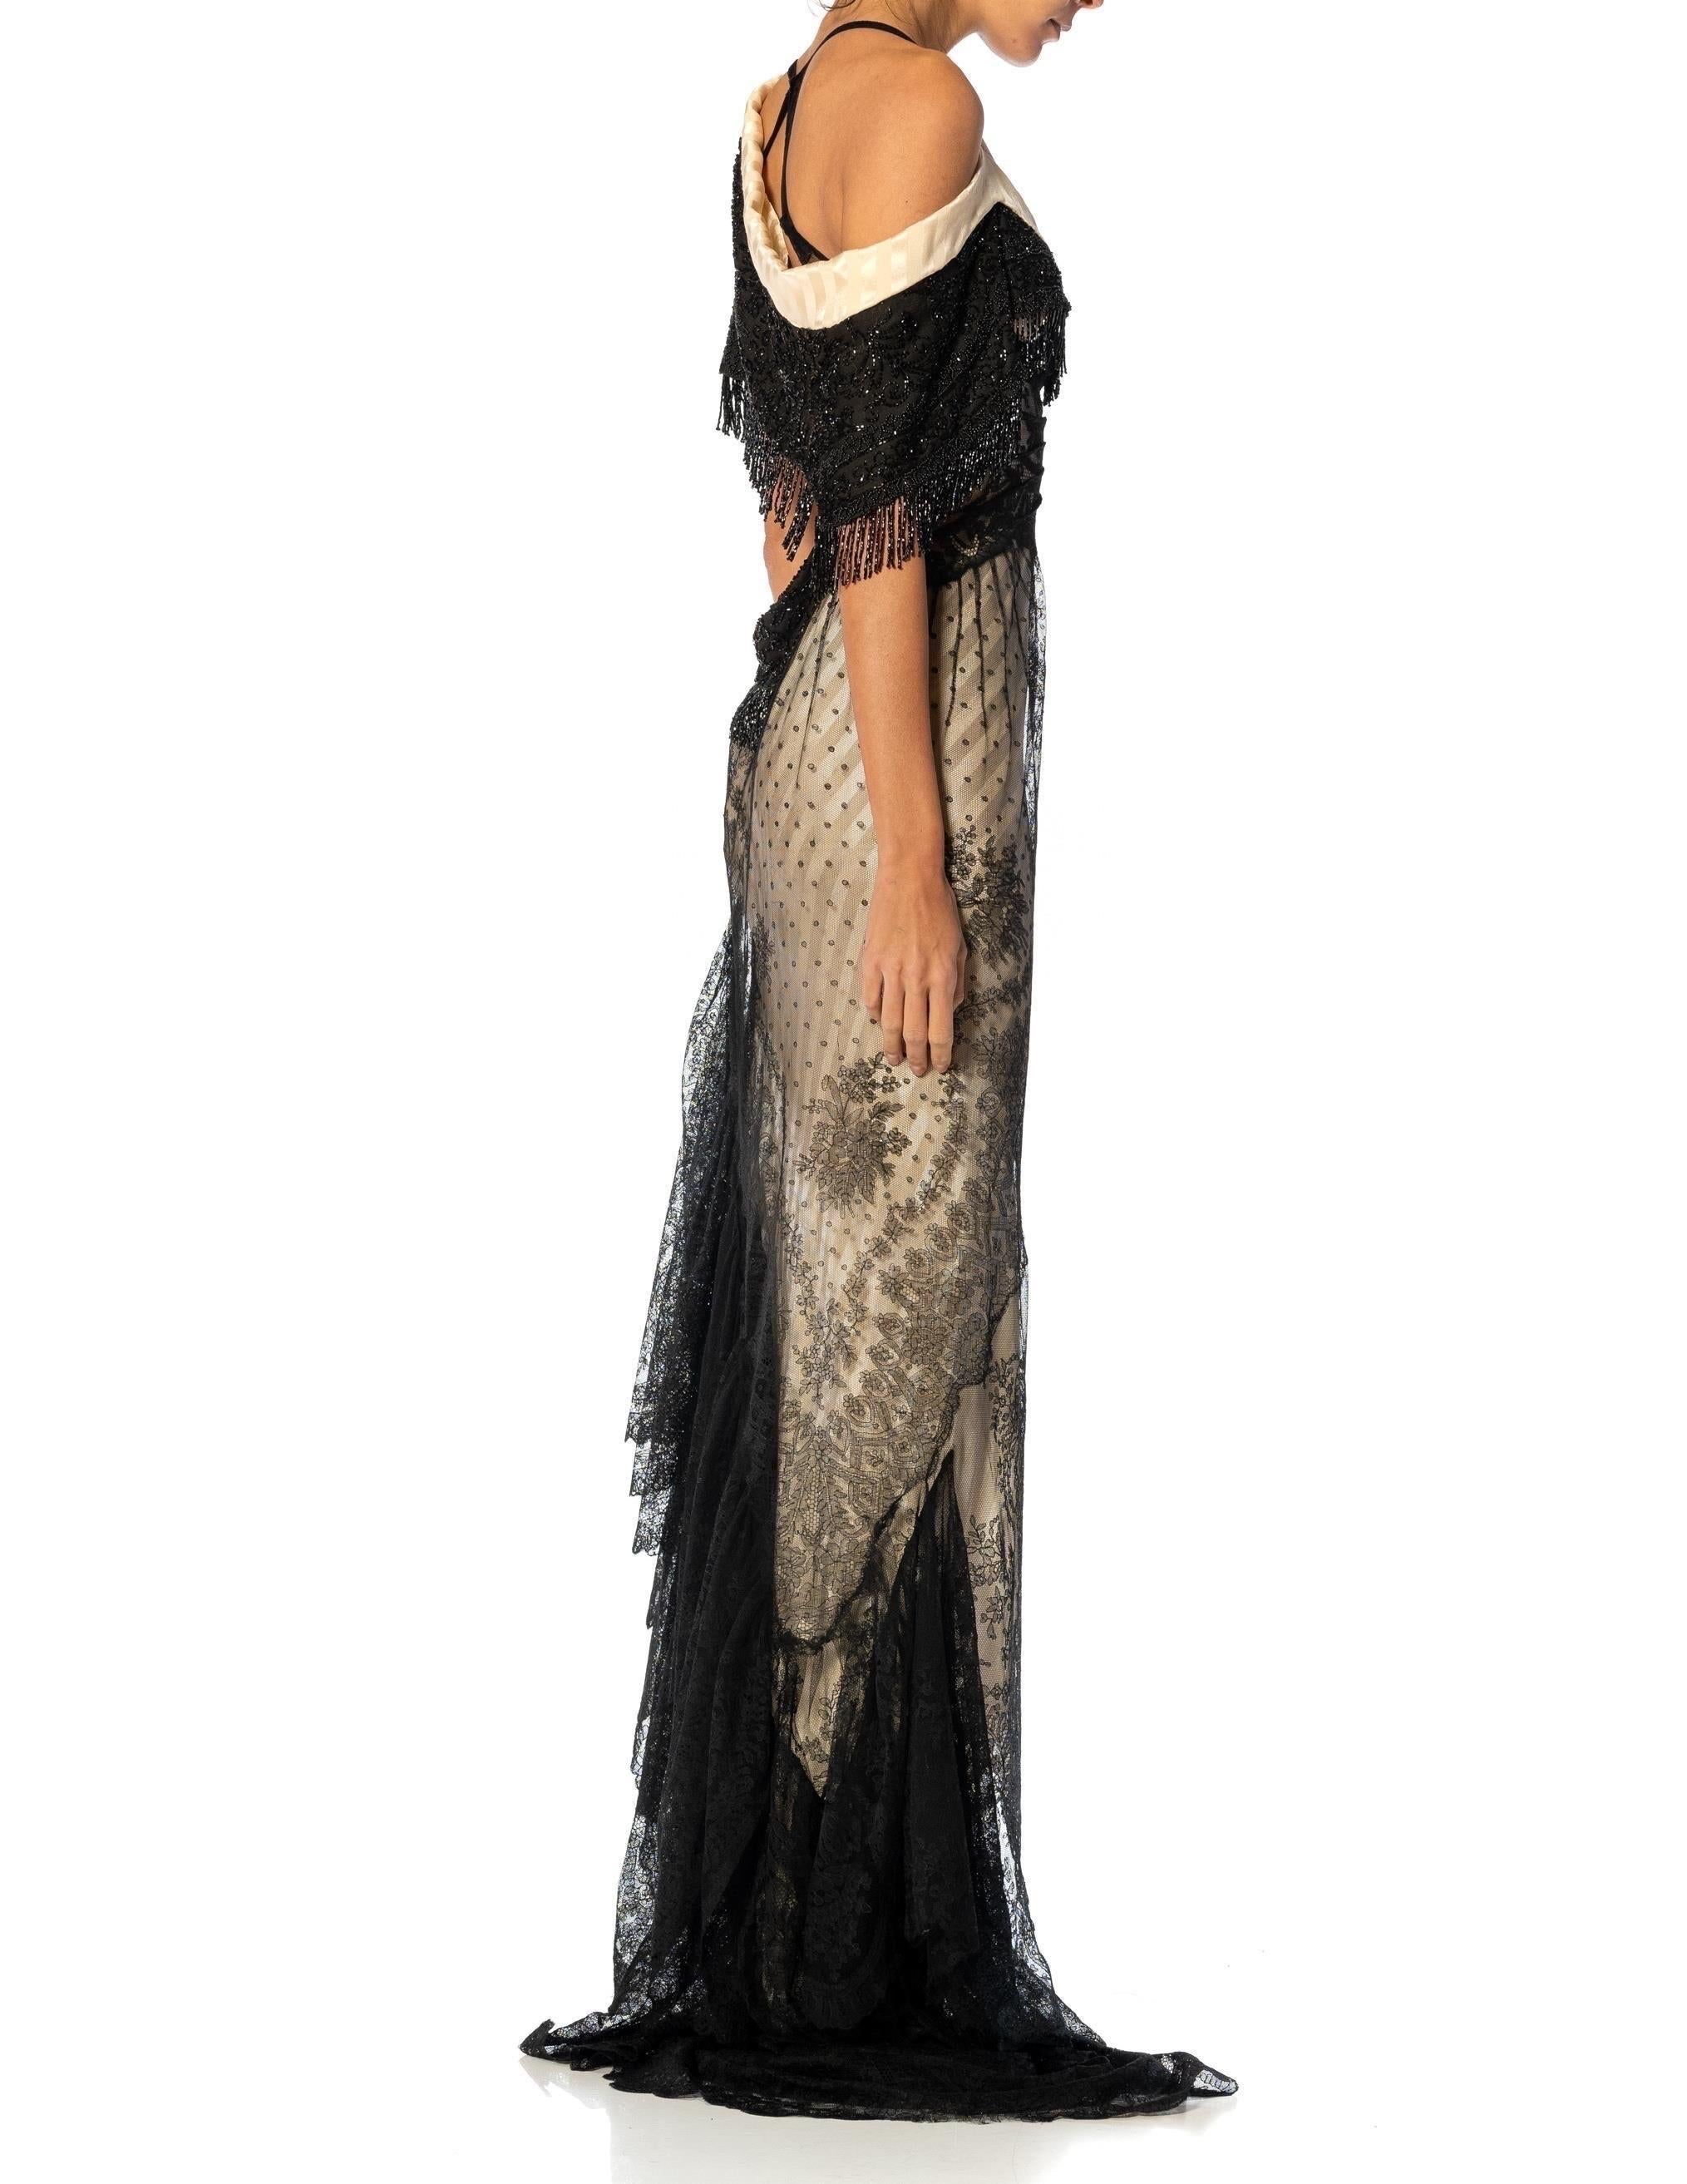 MORPHEW ATELIER Black & Cream Silk Chantilly Lace Trained Gown With Victorian B For Sale 12